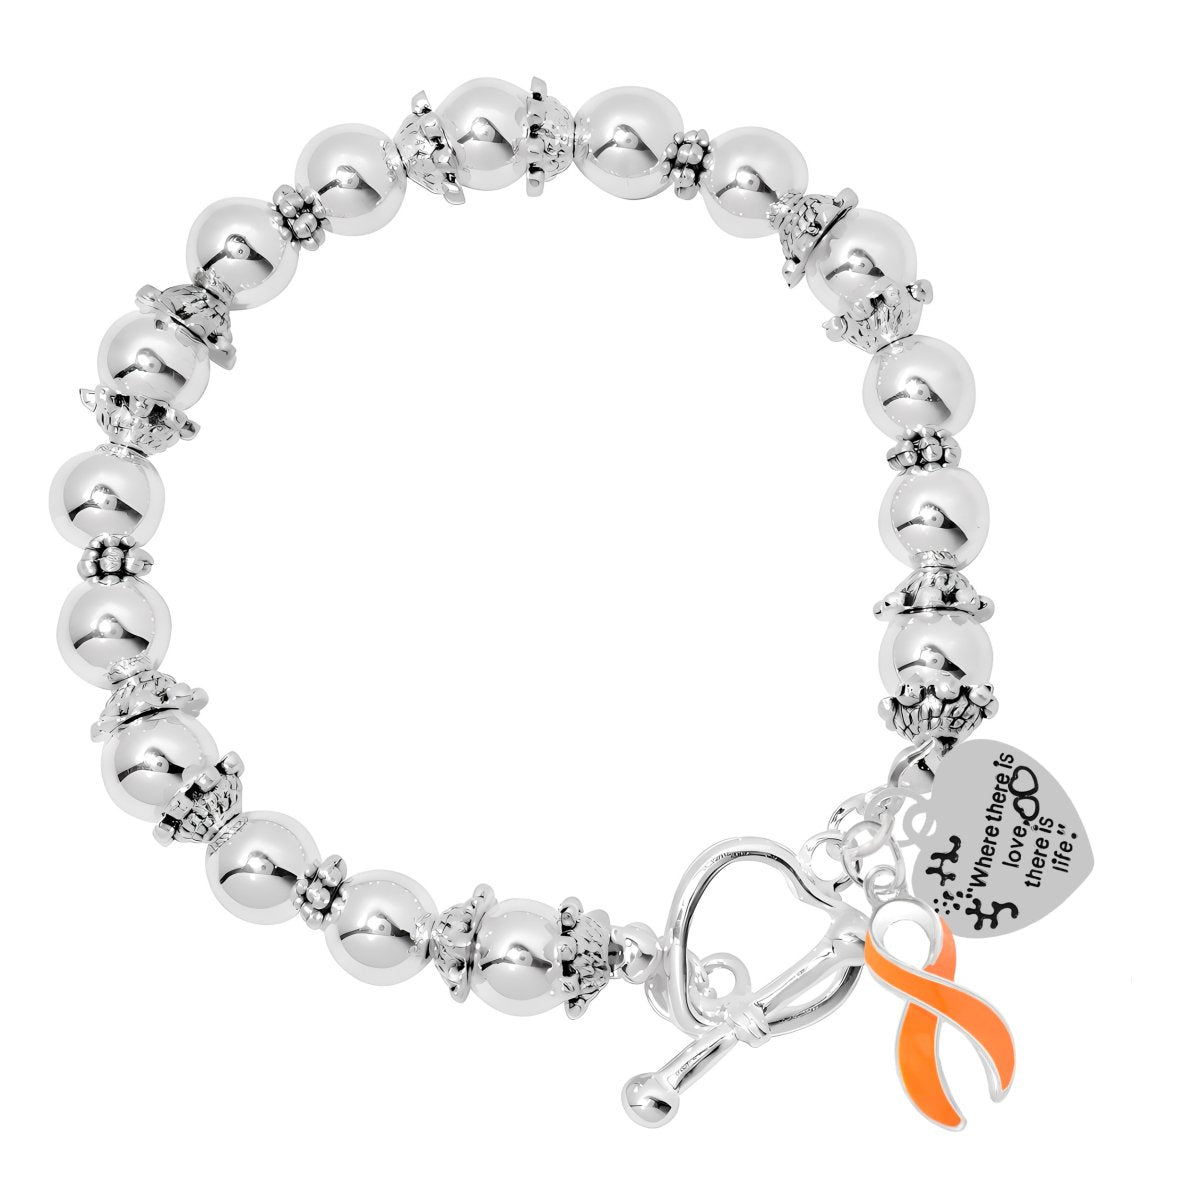 Where There is Love Multiple Sclerosis Bracelets - Fundraising For A Cause